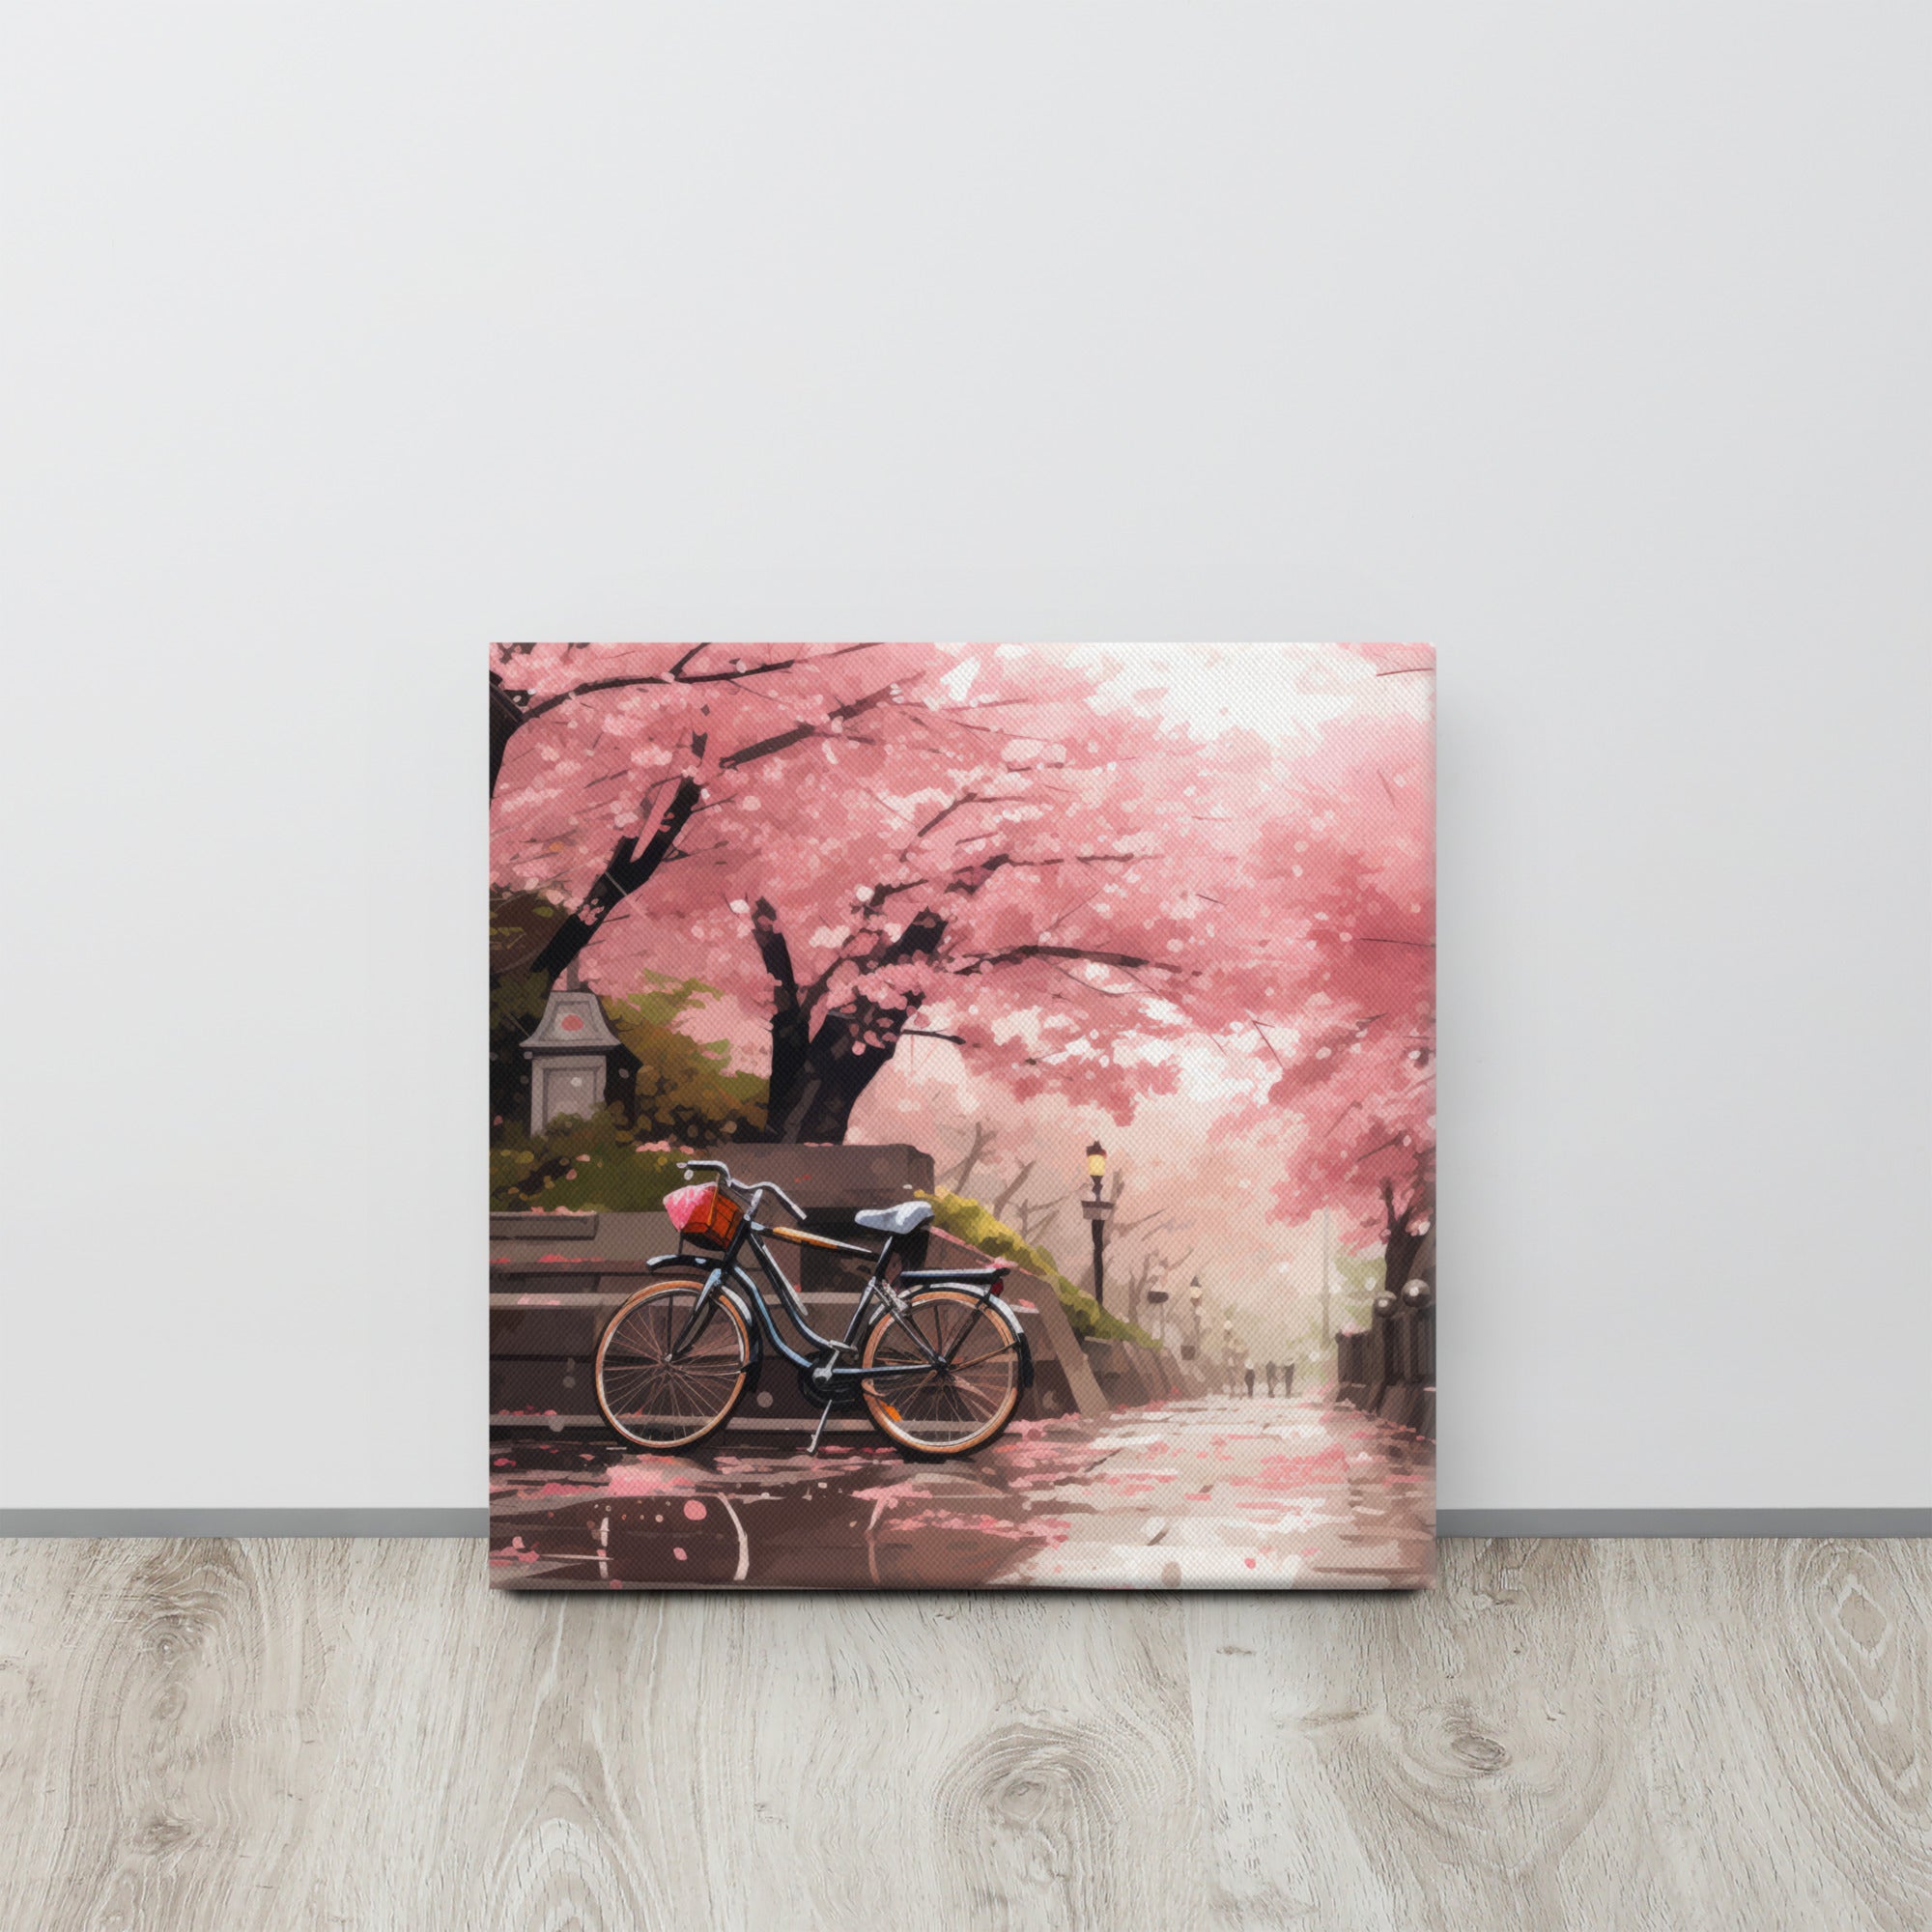 Blossoms of Passage - A Tranquil Bicycle Scene Canvas Print